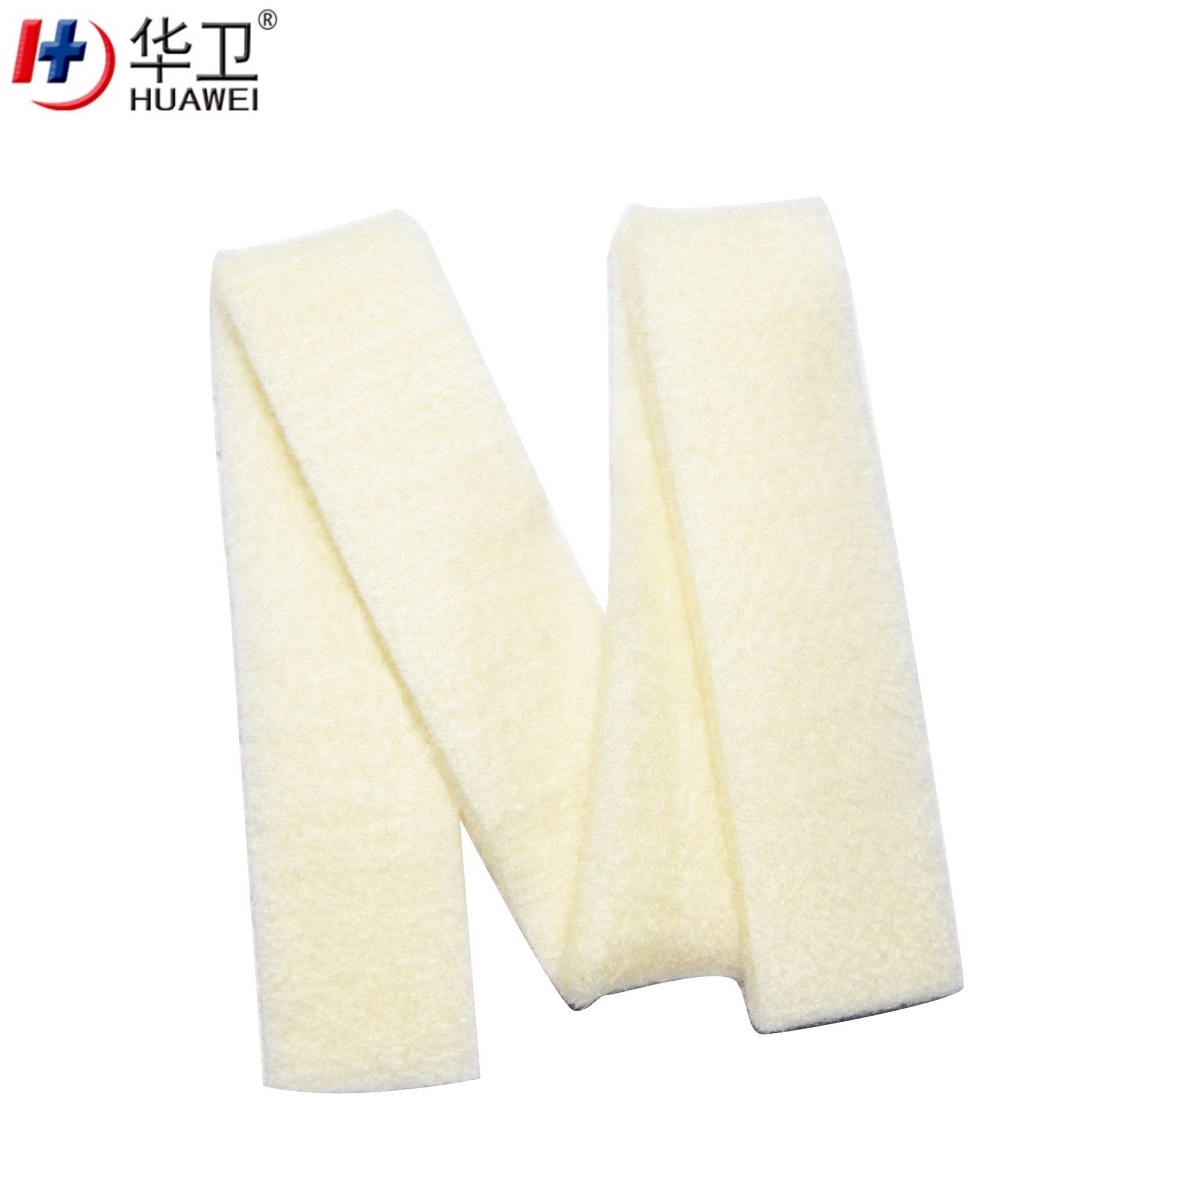 Huawei medical patch supply for healing-2